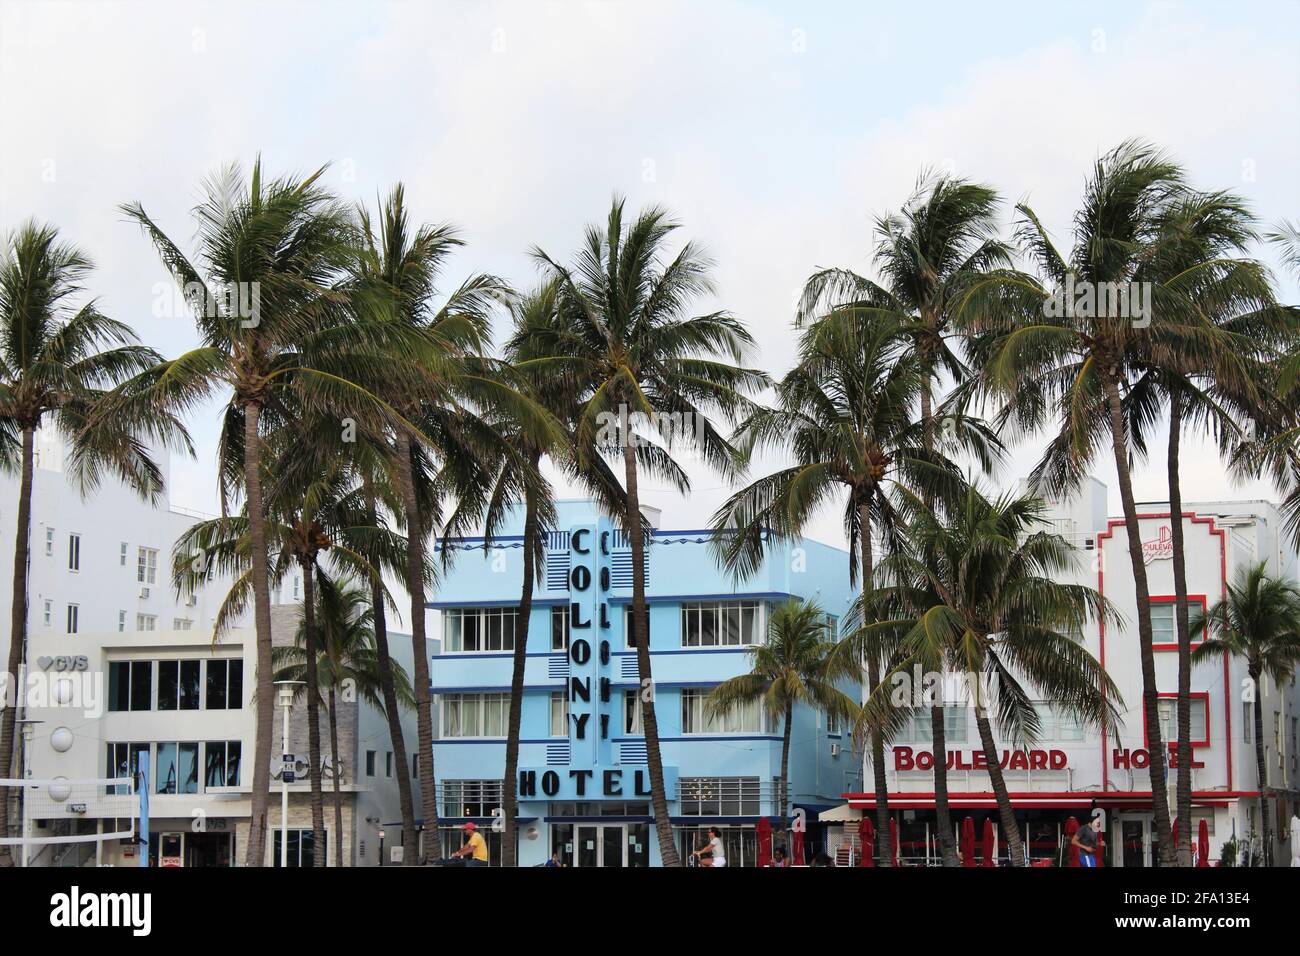 Ocean Drive Hotel buildings. Art deco area. Famous Colony Hotel and Boulevard Hotel. Also, a CVS on ocean drive is spotted. Stock Photo